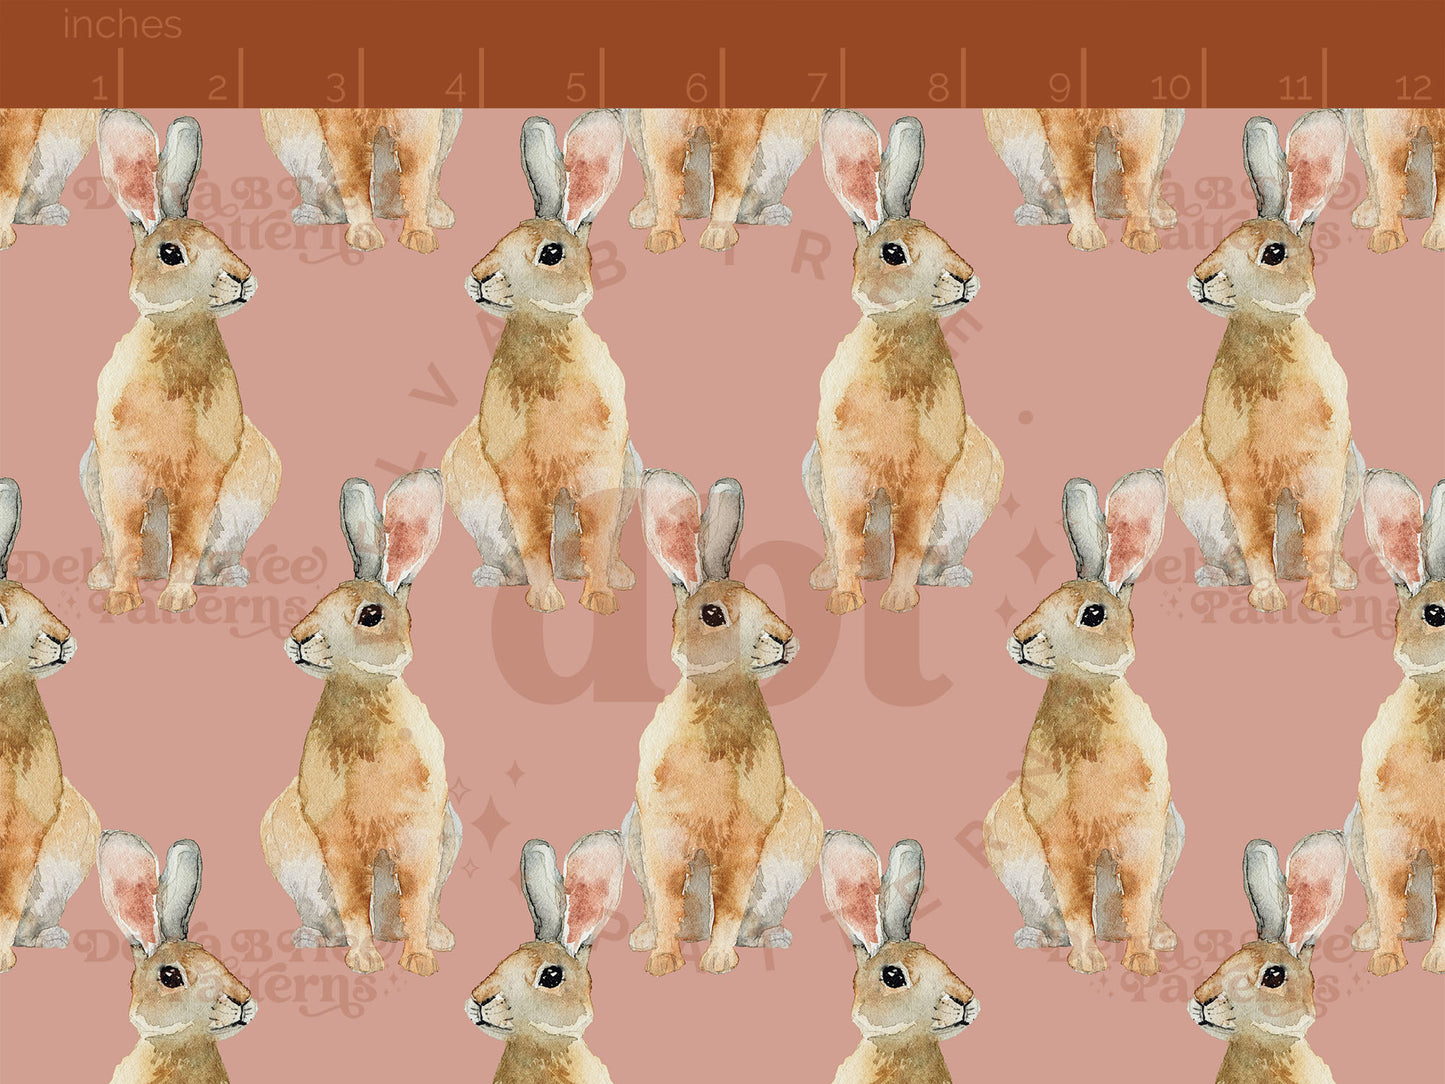 Watercolor bunnies on a dusty rose background seamless pattern scale digital file for small shops that make handmade products in small batches.